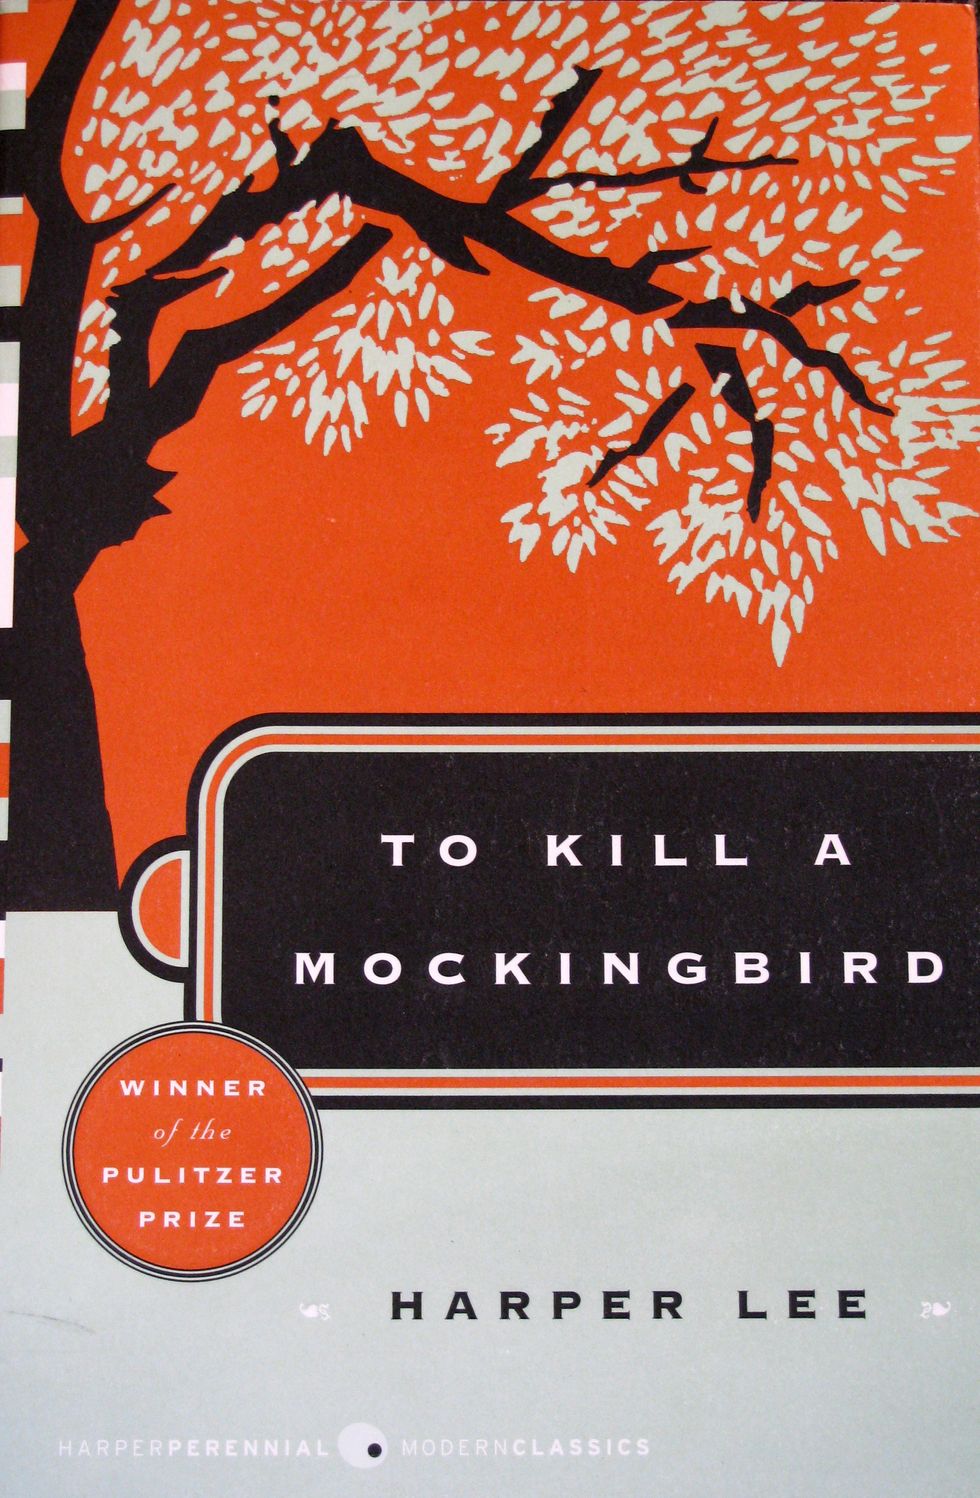 Lessons Learned From "To Kill A Mockingbird"